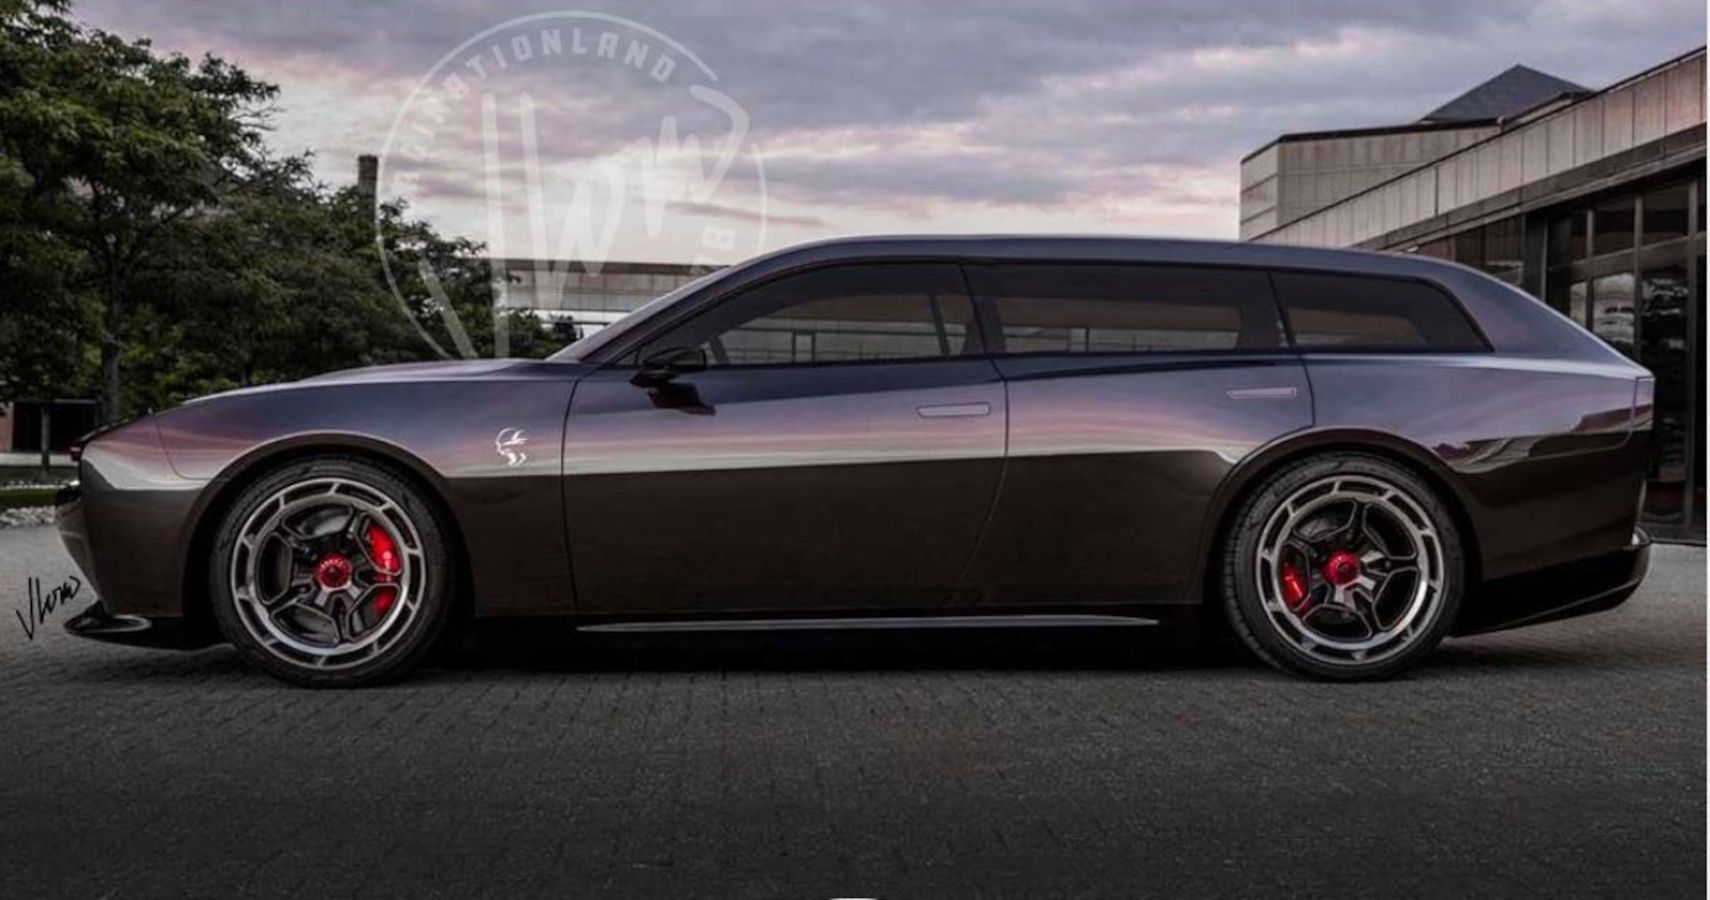 This Dodge Charger Daytona STR Station Wagon Could Be The Ultimate